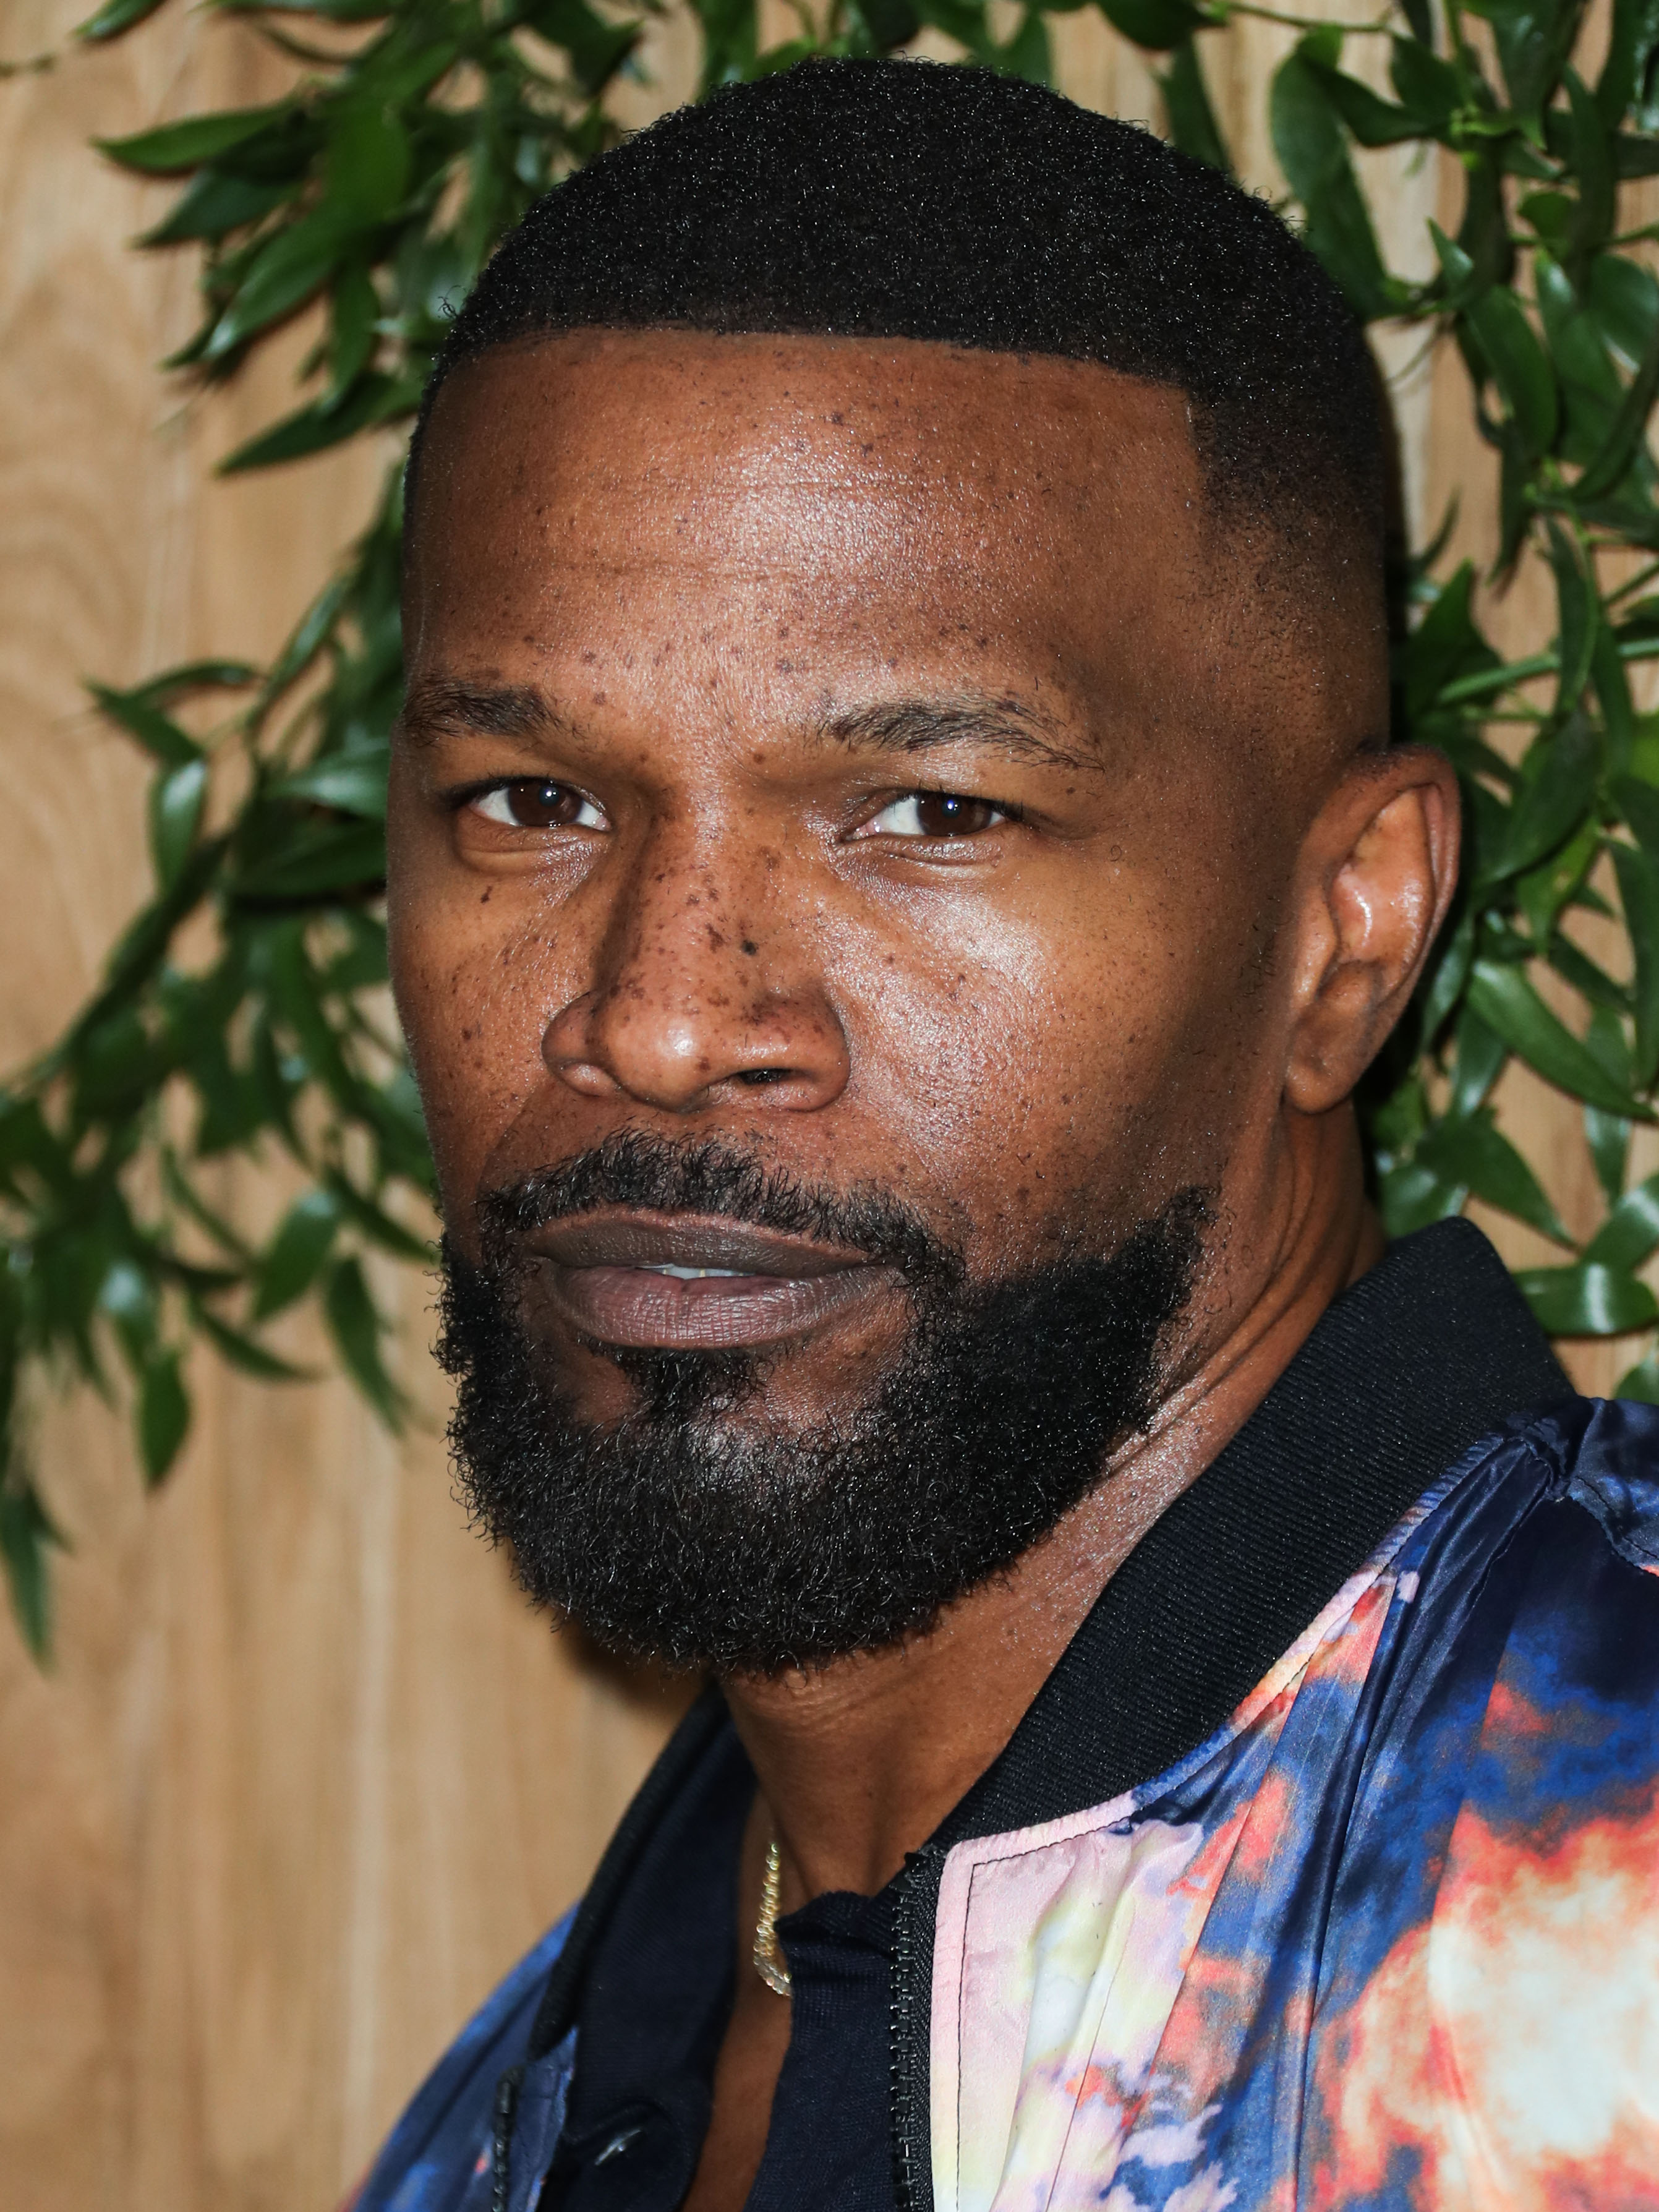 Actor Jamie Foxx arrives at the 1 Hotel West Hollywood Grand Opening Event held at 1 Hotel West Hollywood on November 5, 2019 in West Hollywood, Los Angeles, California, United States.